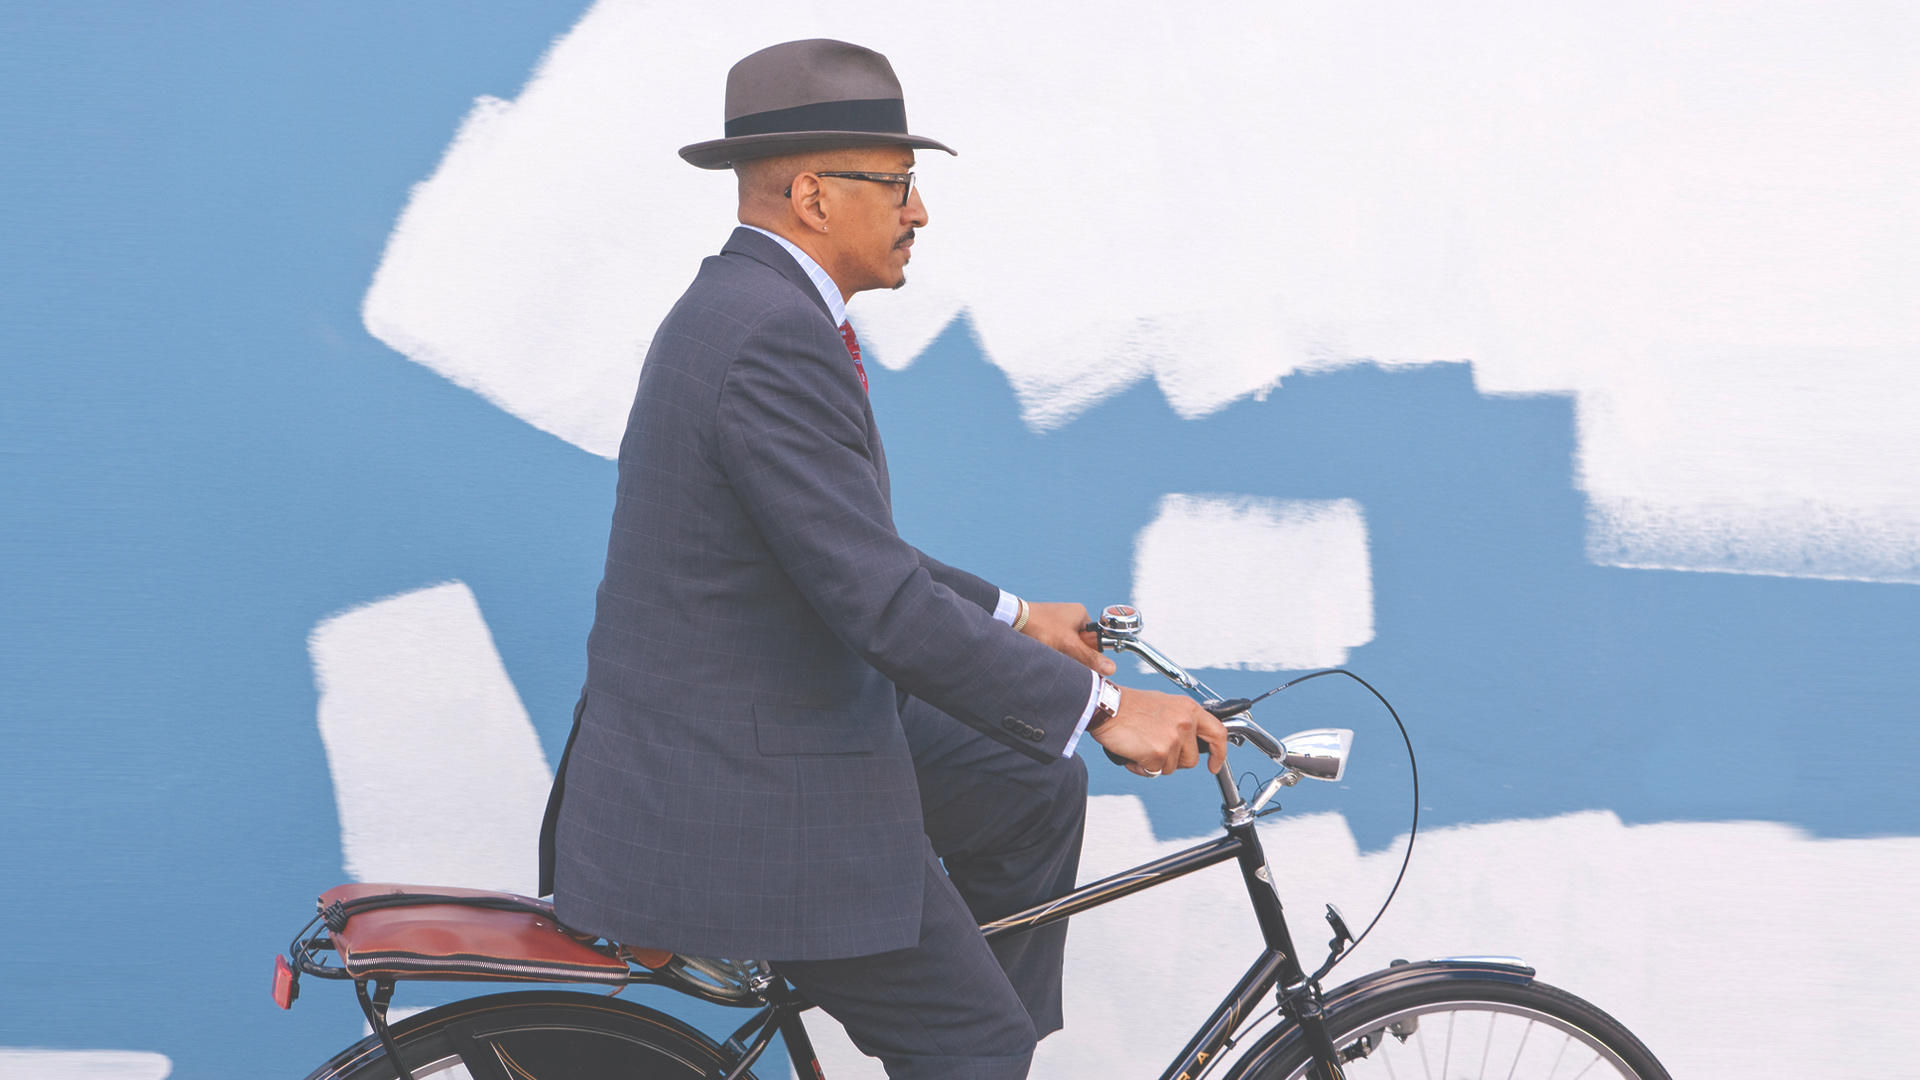 Business man riding his bicycle to work